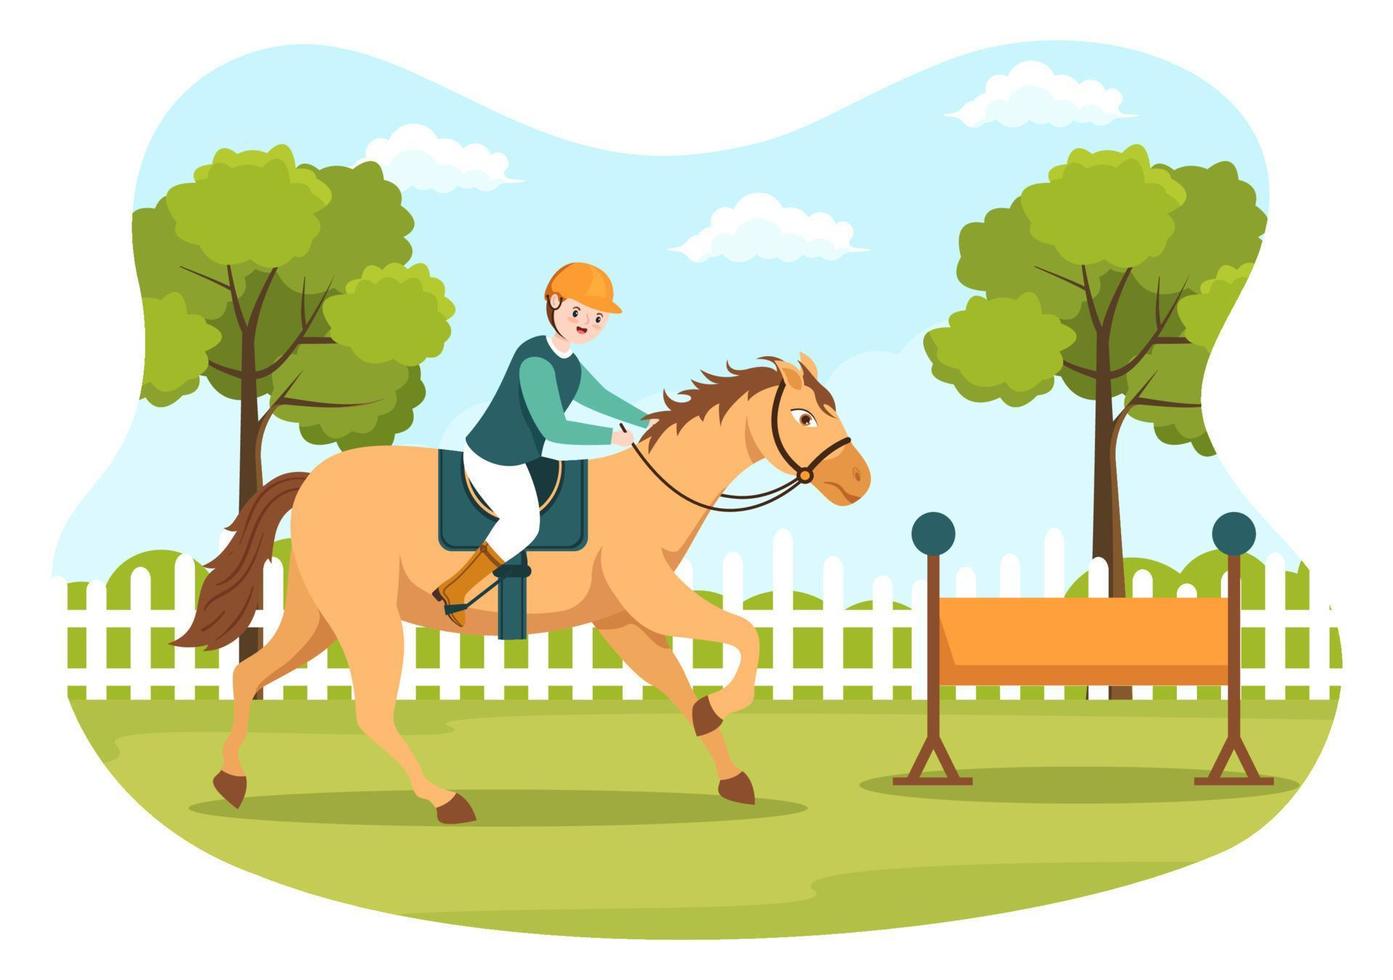 Horse Riding Cartoon Illustration with Cute People Character Practicing Horseback Ride or Equestrianism Sports in the Green Field vector